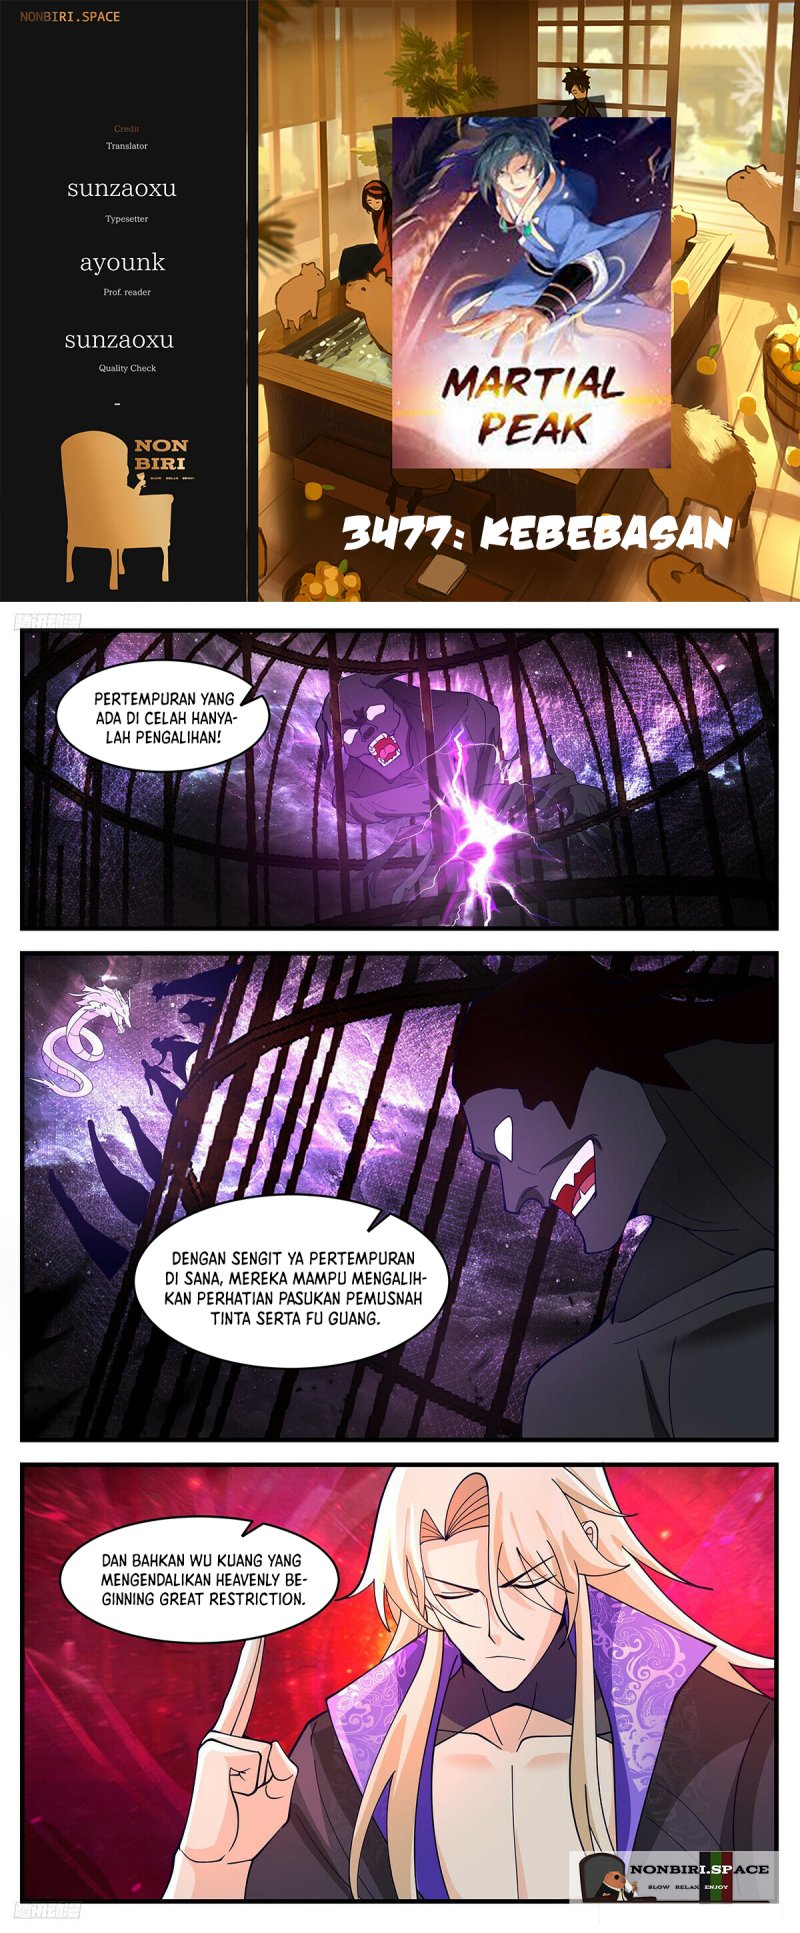 Martial Peak: Chapter 3477 - Page 1